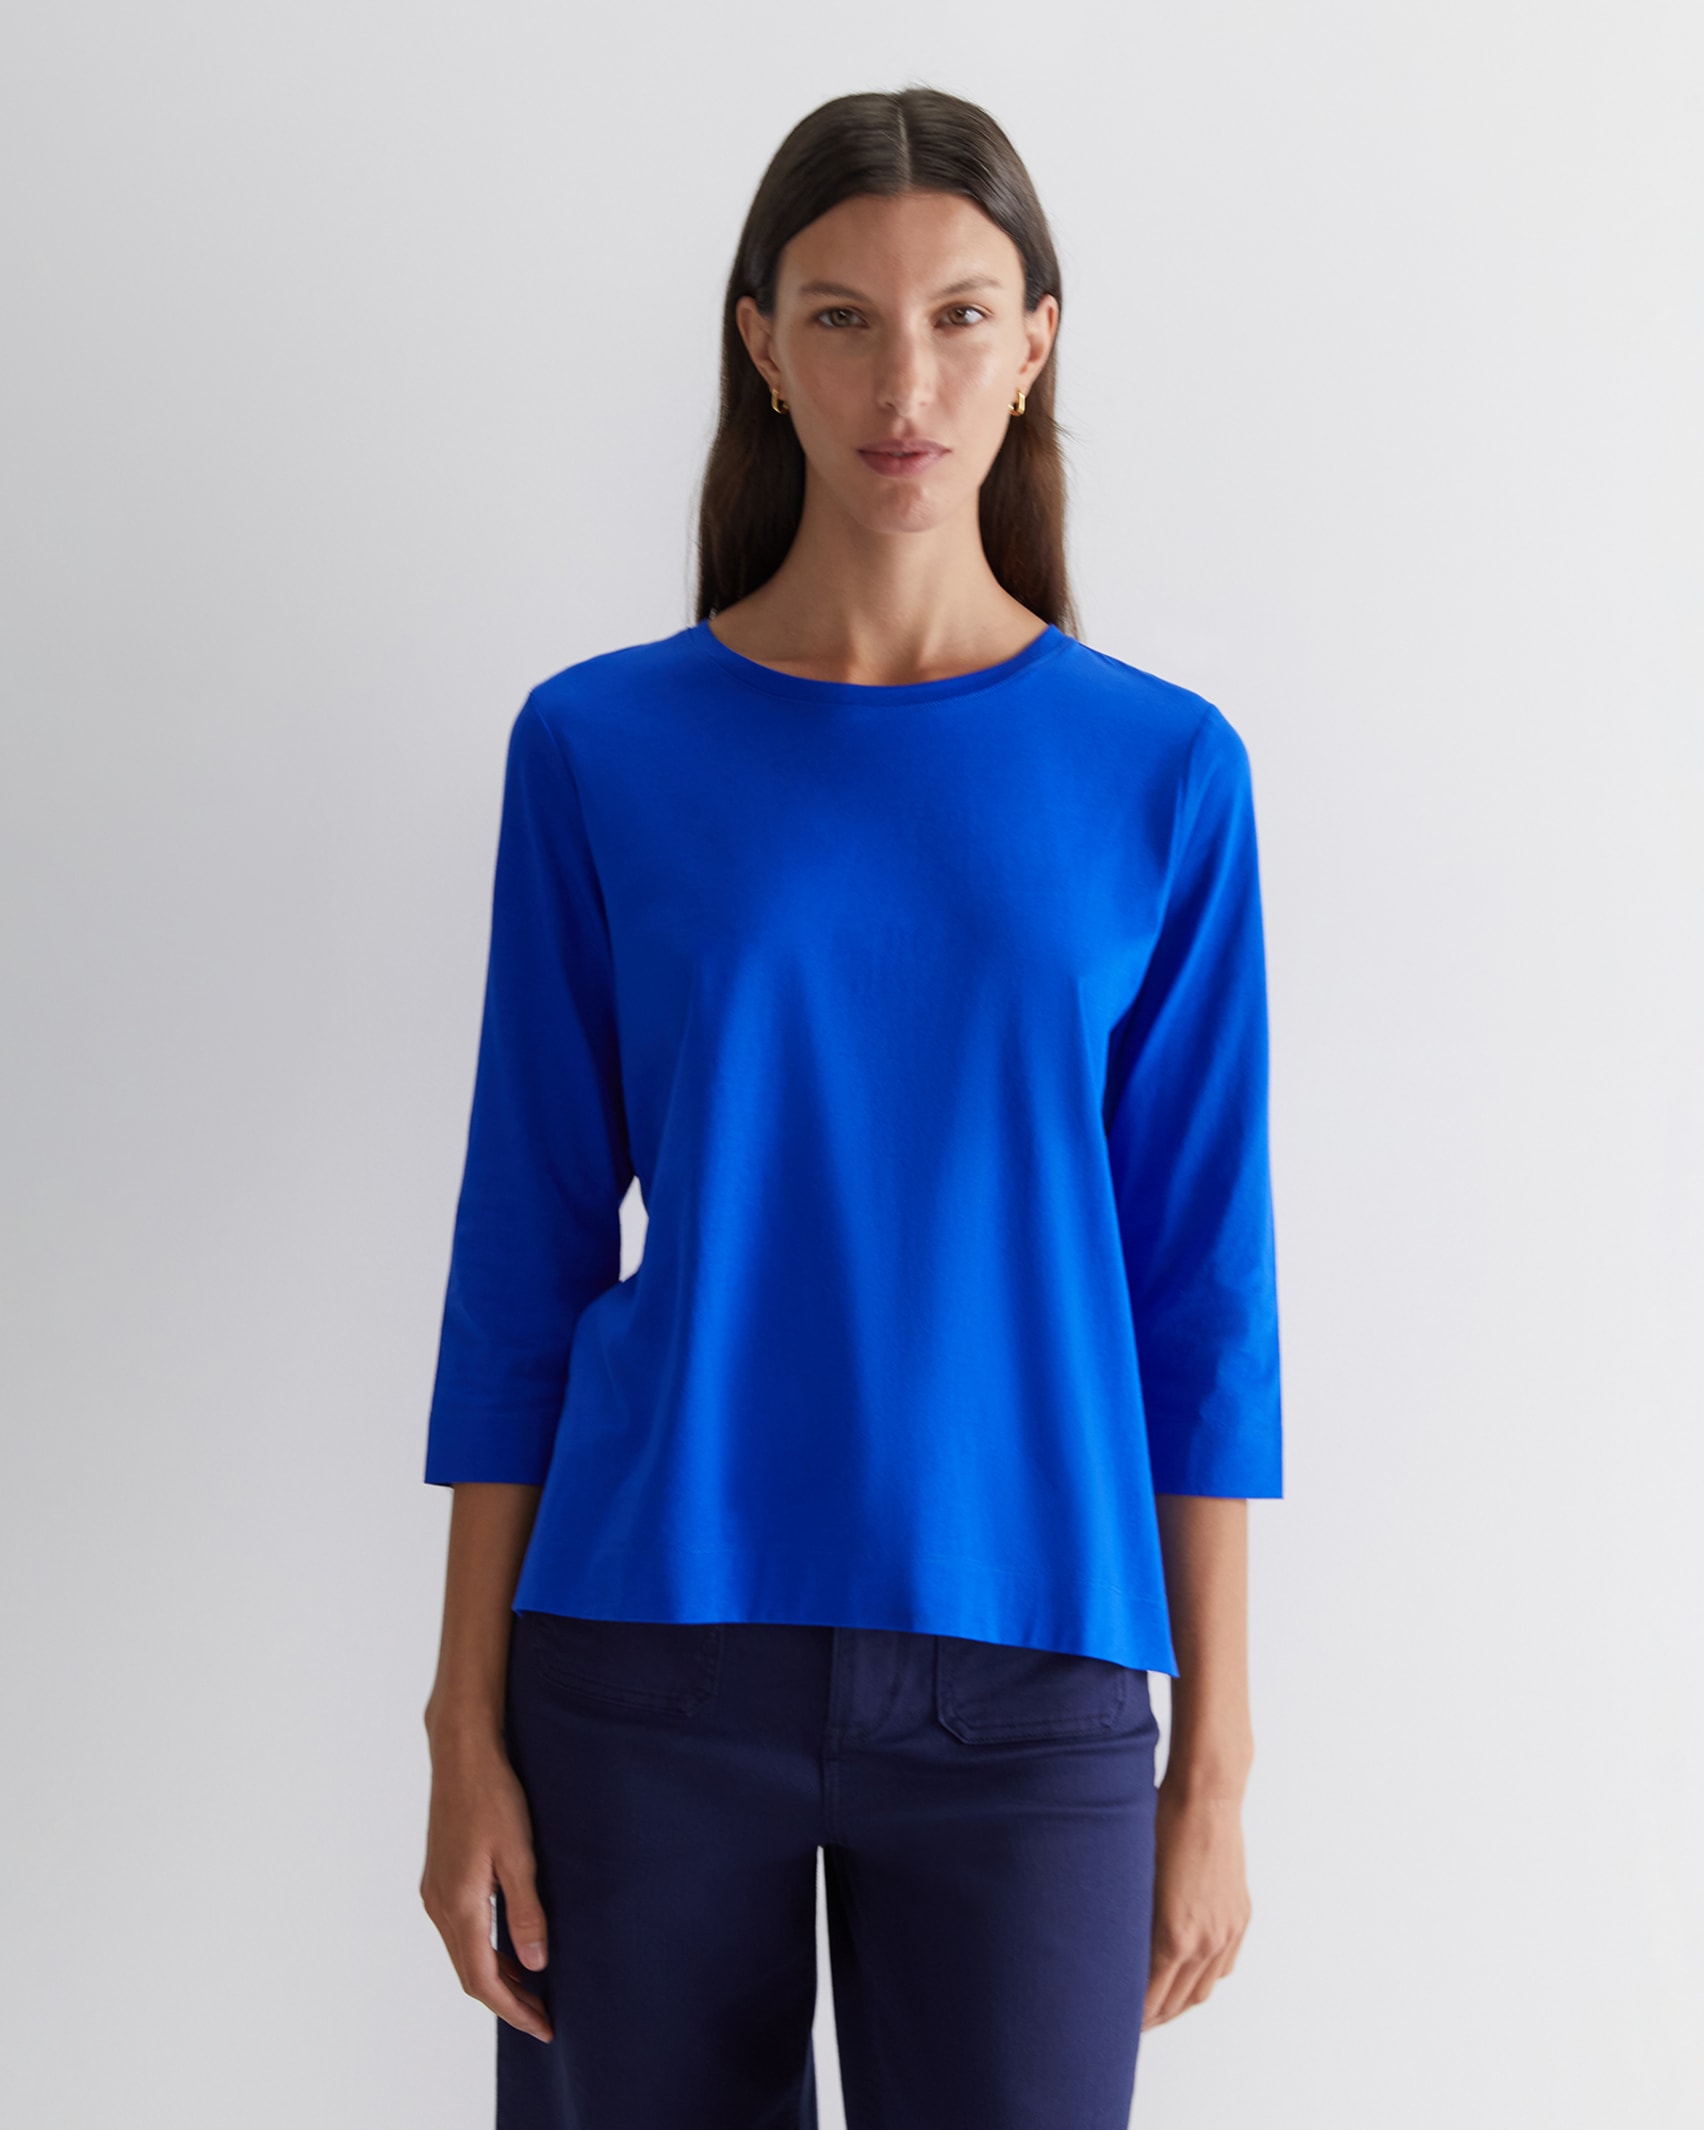 Cotton Crew 3/4 Sleeve T-Shirt in SAPPHIRE